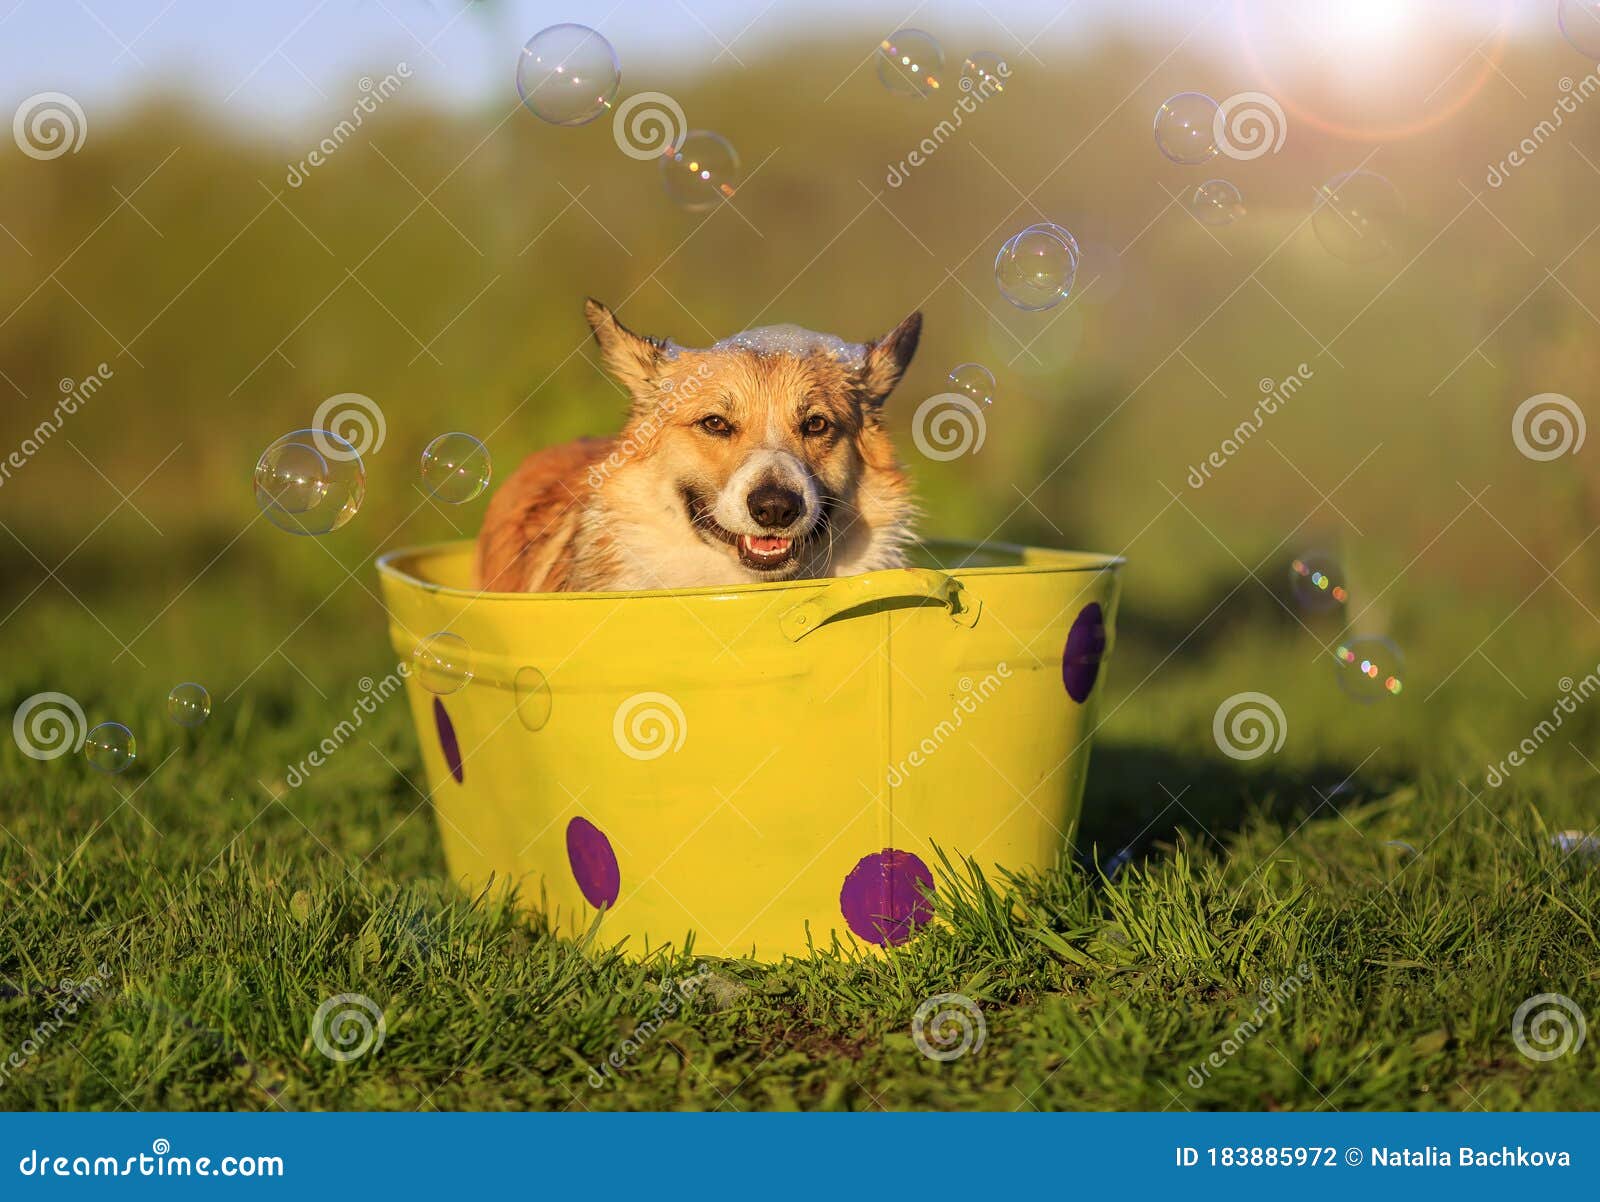 Portrait of a Corgi Dog in a Trough with Soapy Water on the Grass in a ...